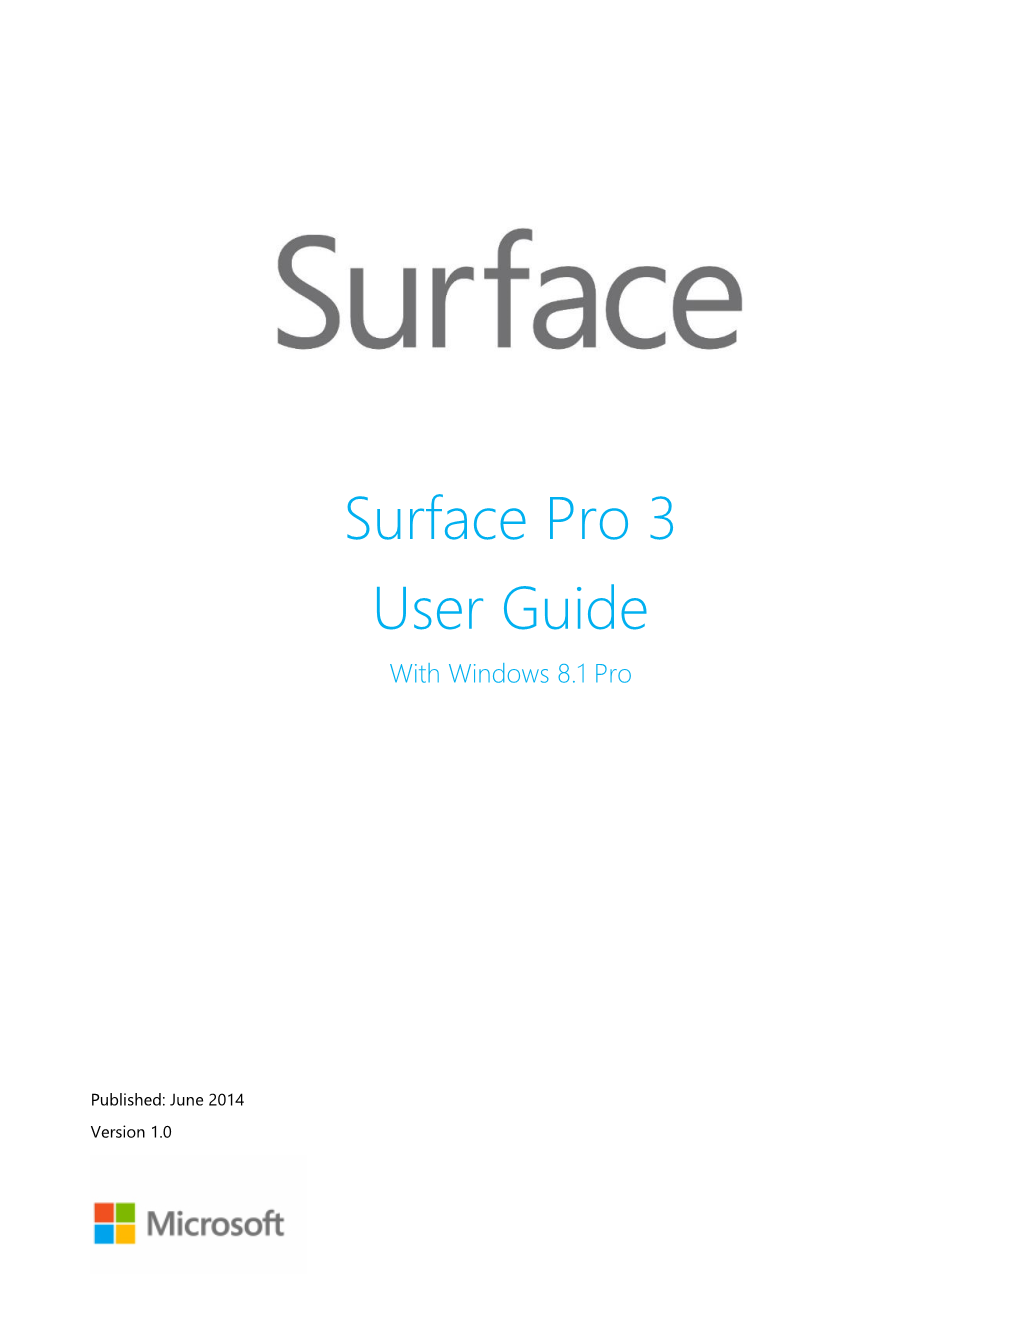 Surface Pro 3 User Guide with Windows 8.1 Pro